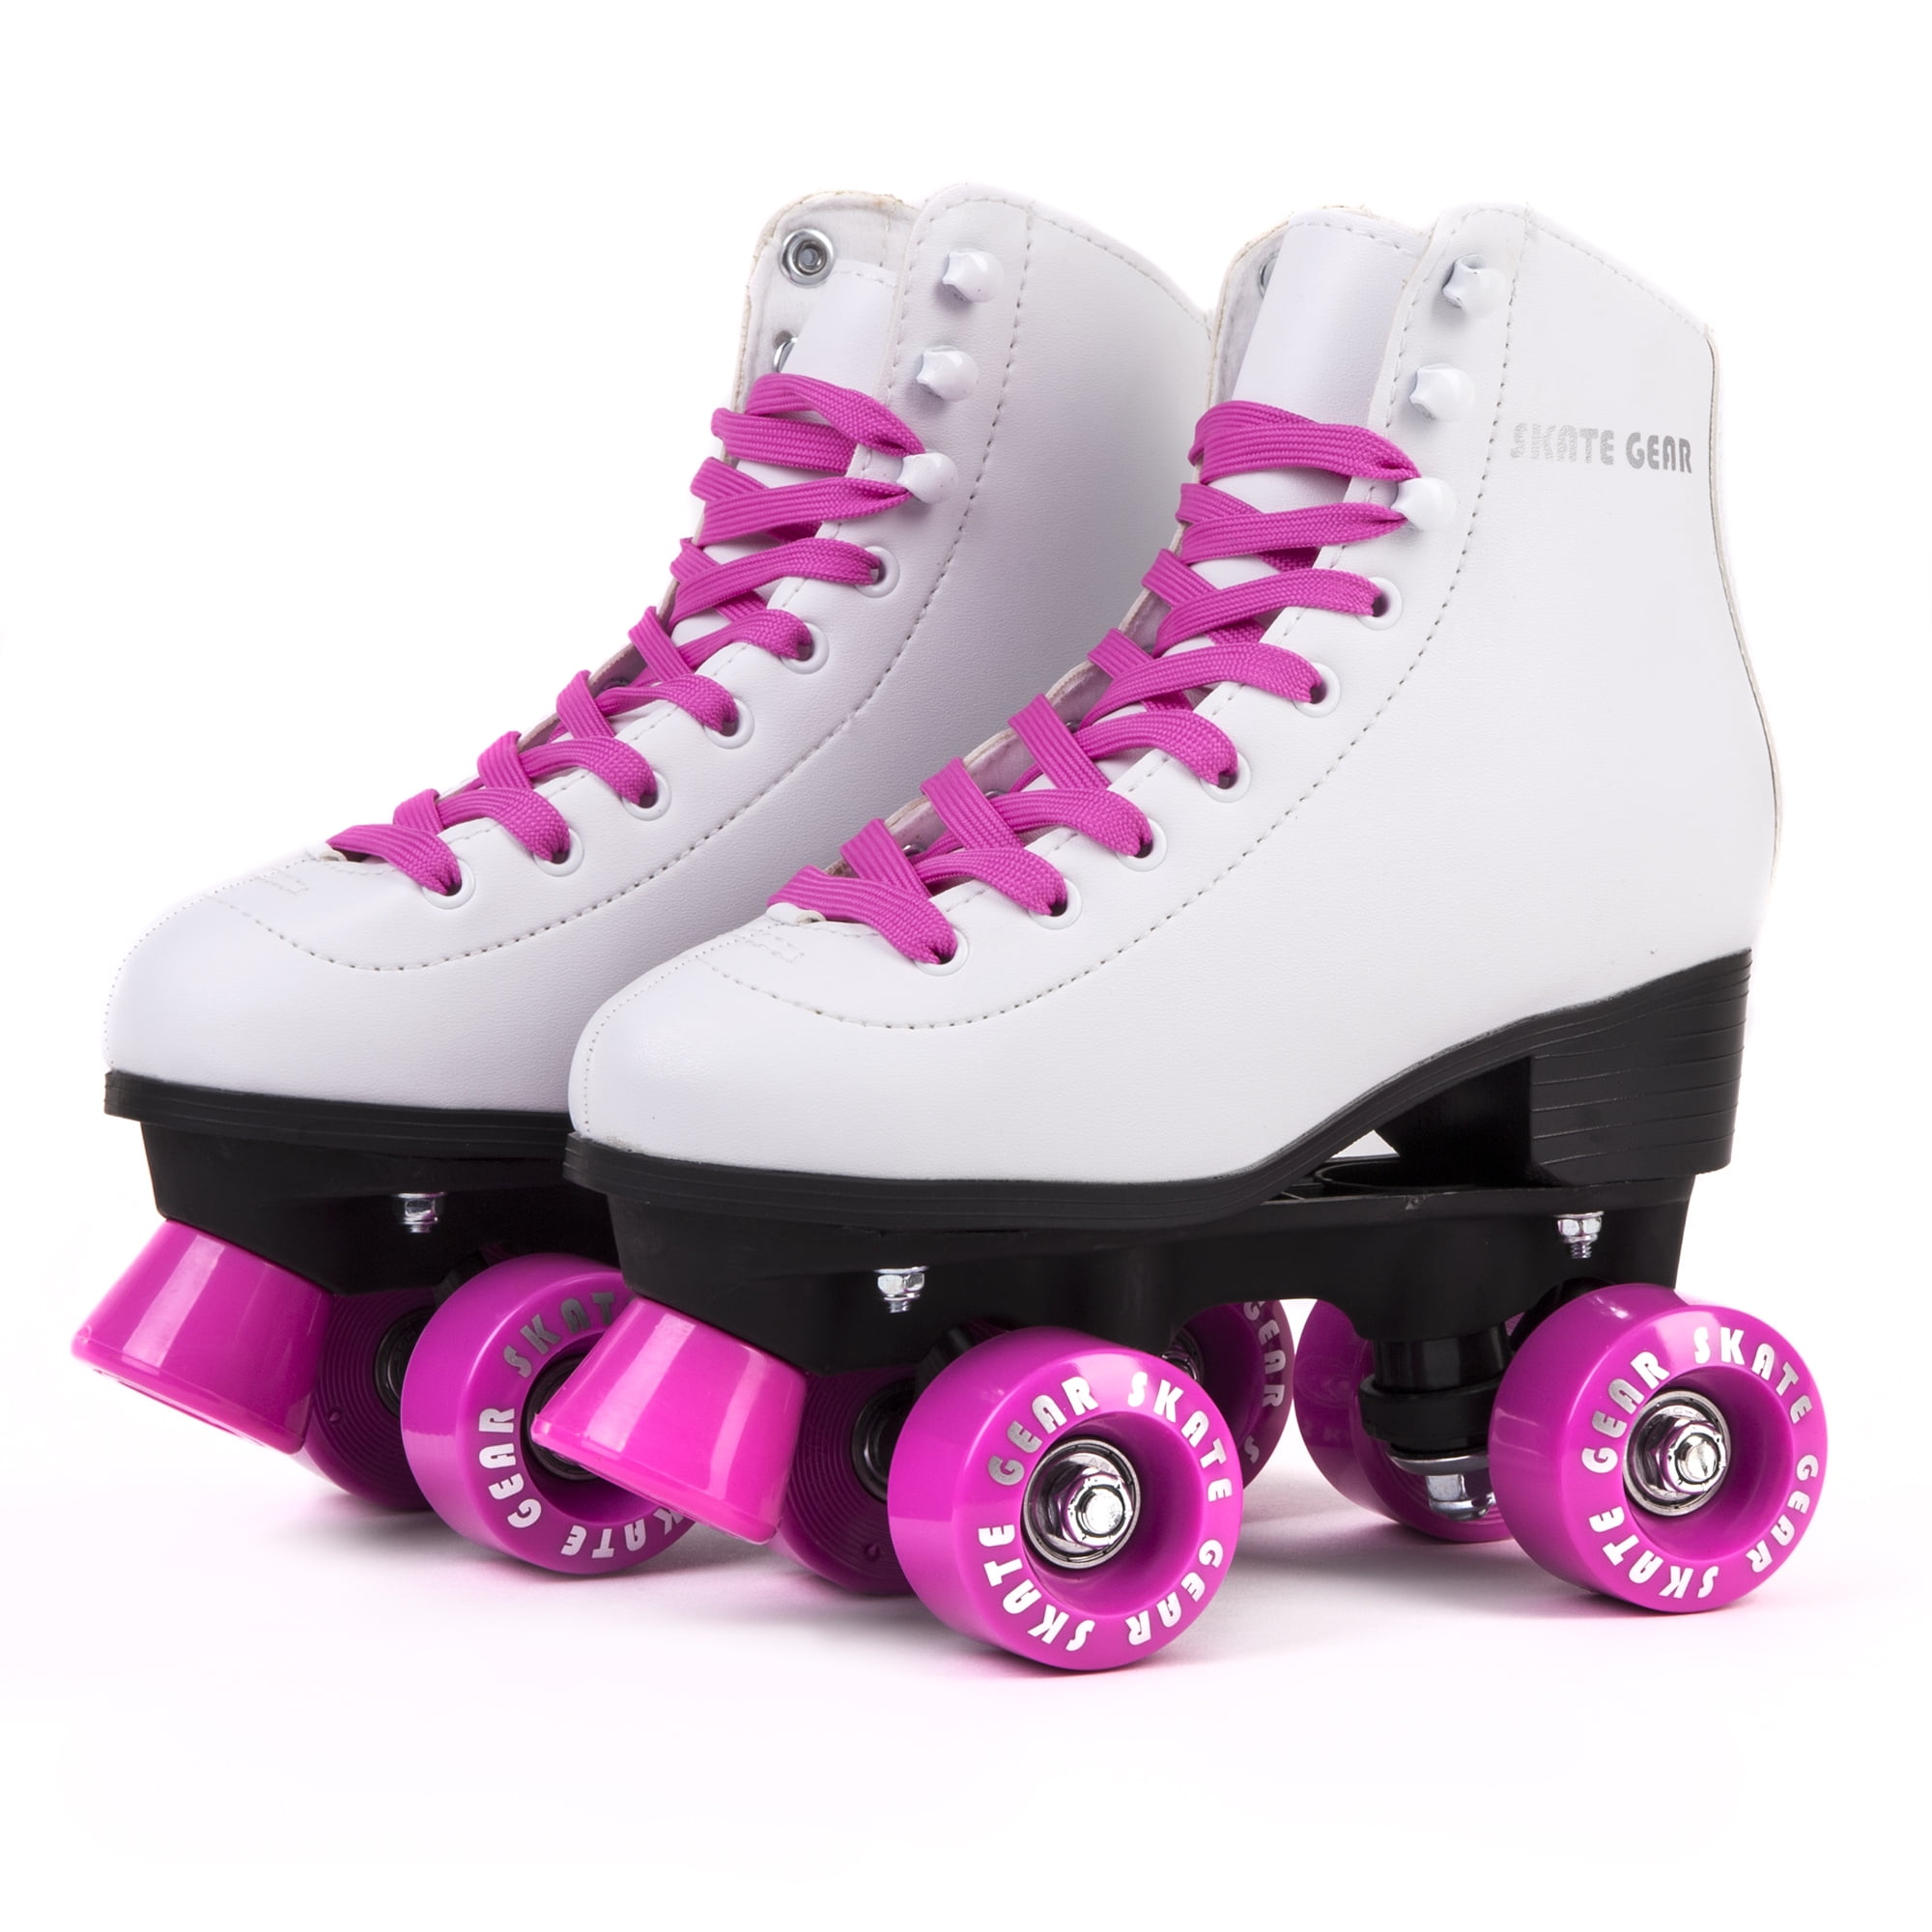 Graphic Purple, Youth 4 / Womens 5 Cal 7 All-Purpose Indoor Outdoor Speedy Roller Skate for Youth and Adults